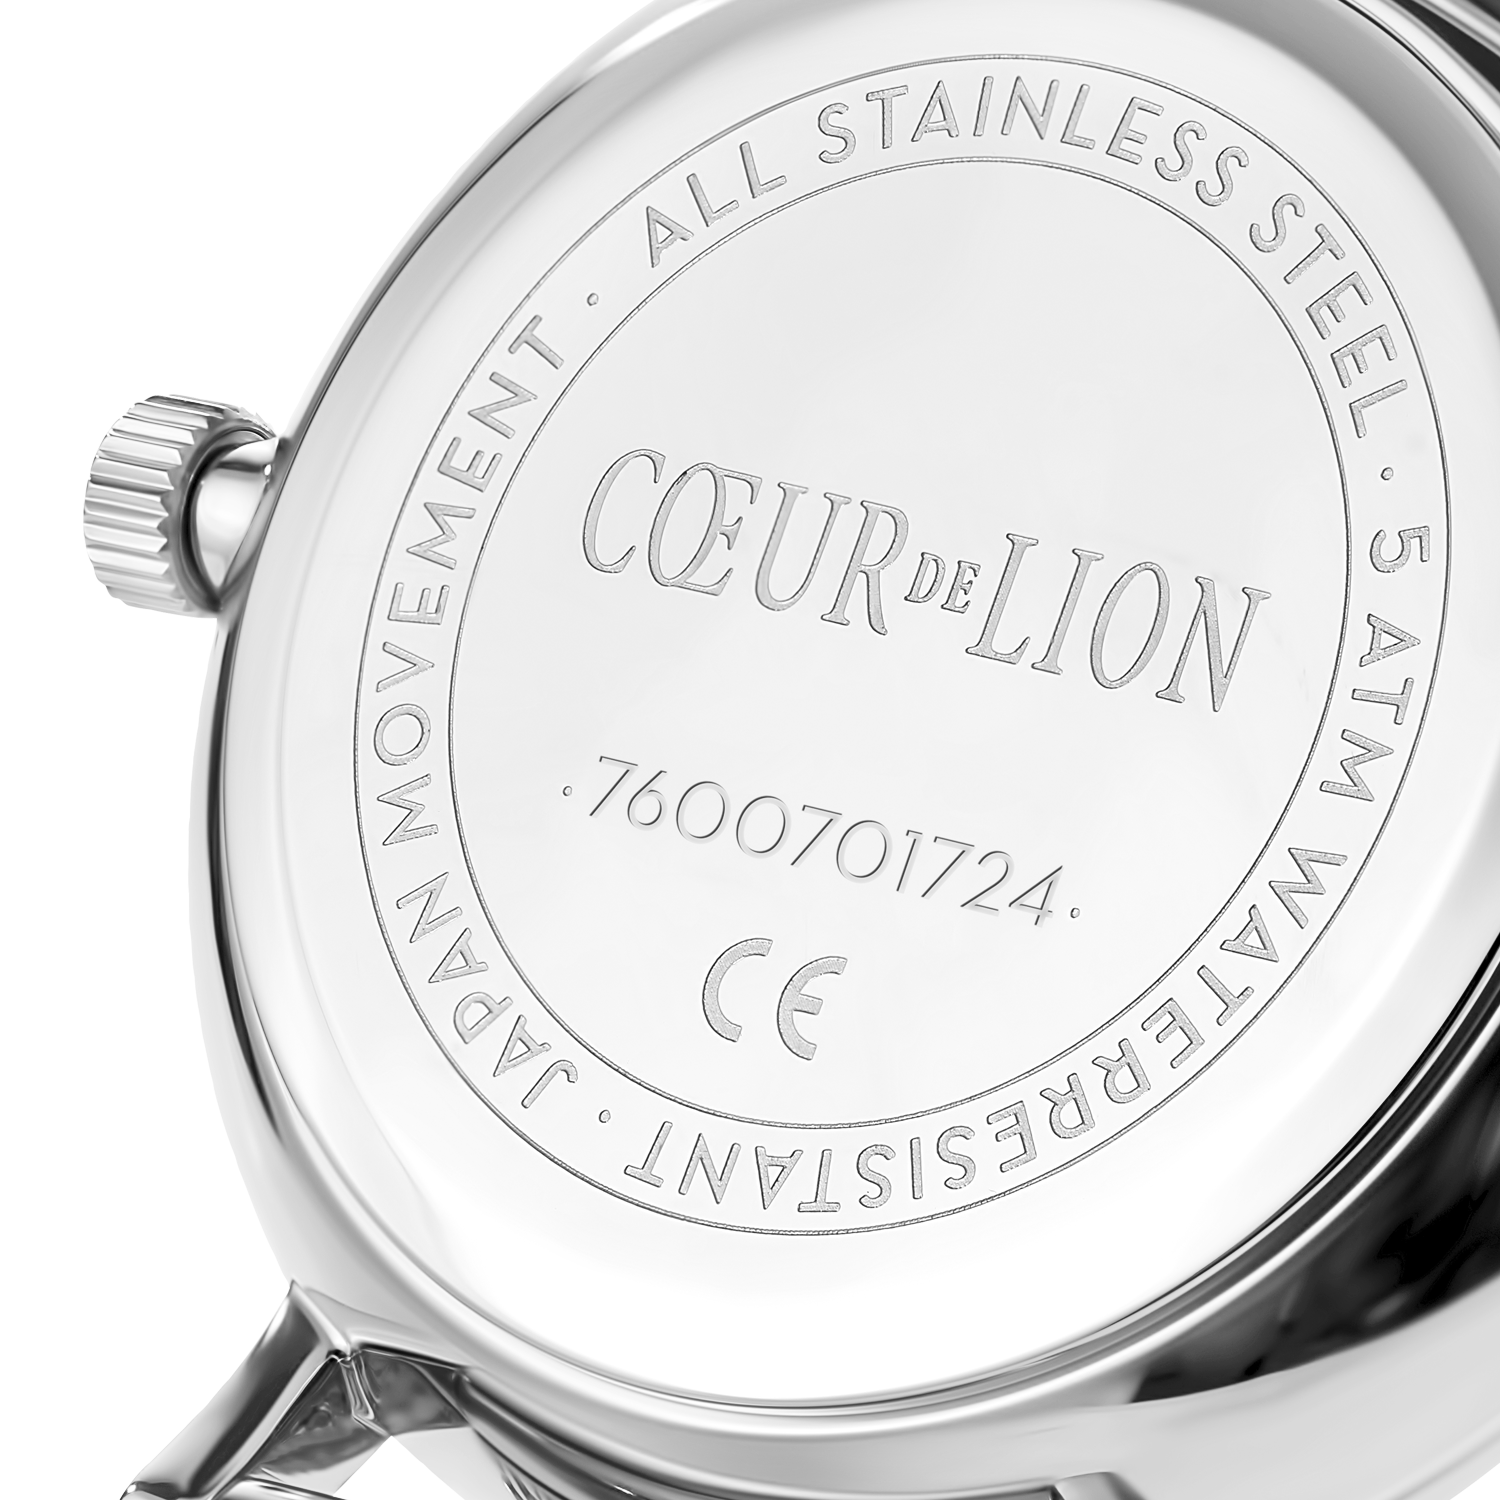 Montre Ronde Silver Sunray Bracelet Cuir Anthracite